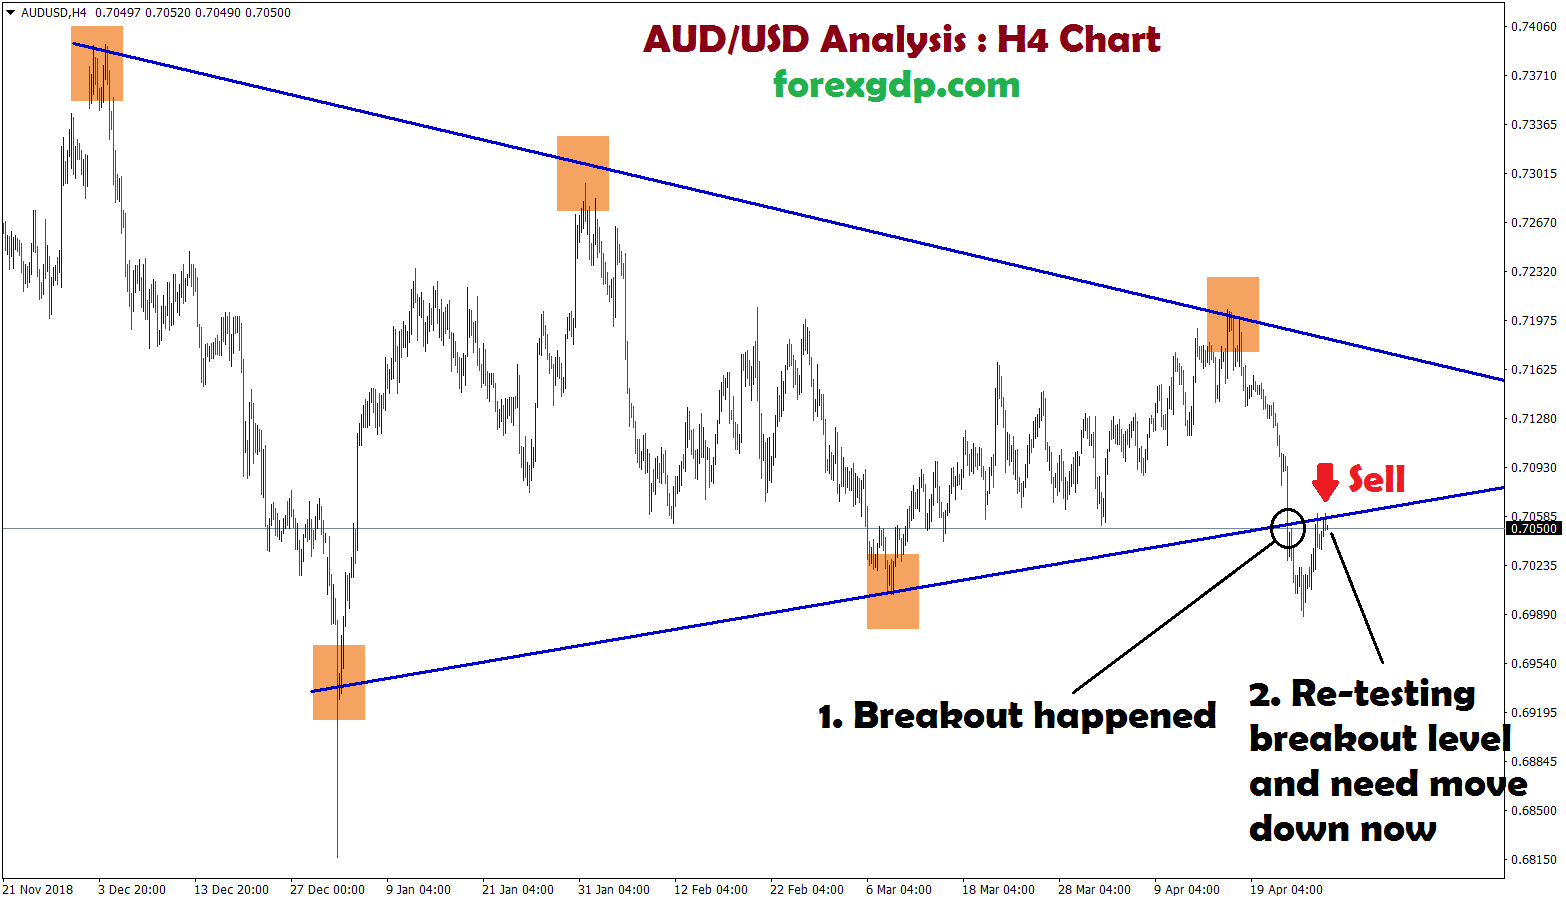 sell aud usd it broken and re-tested the same level and moving down